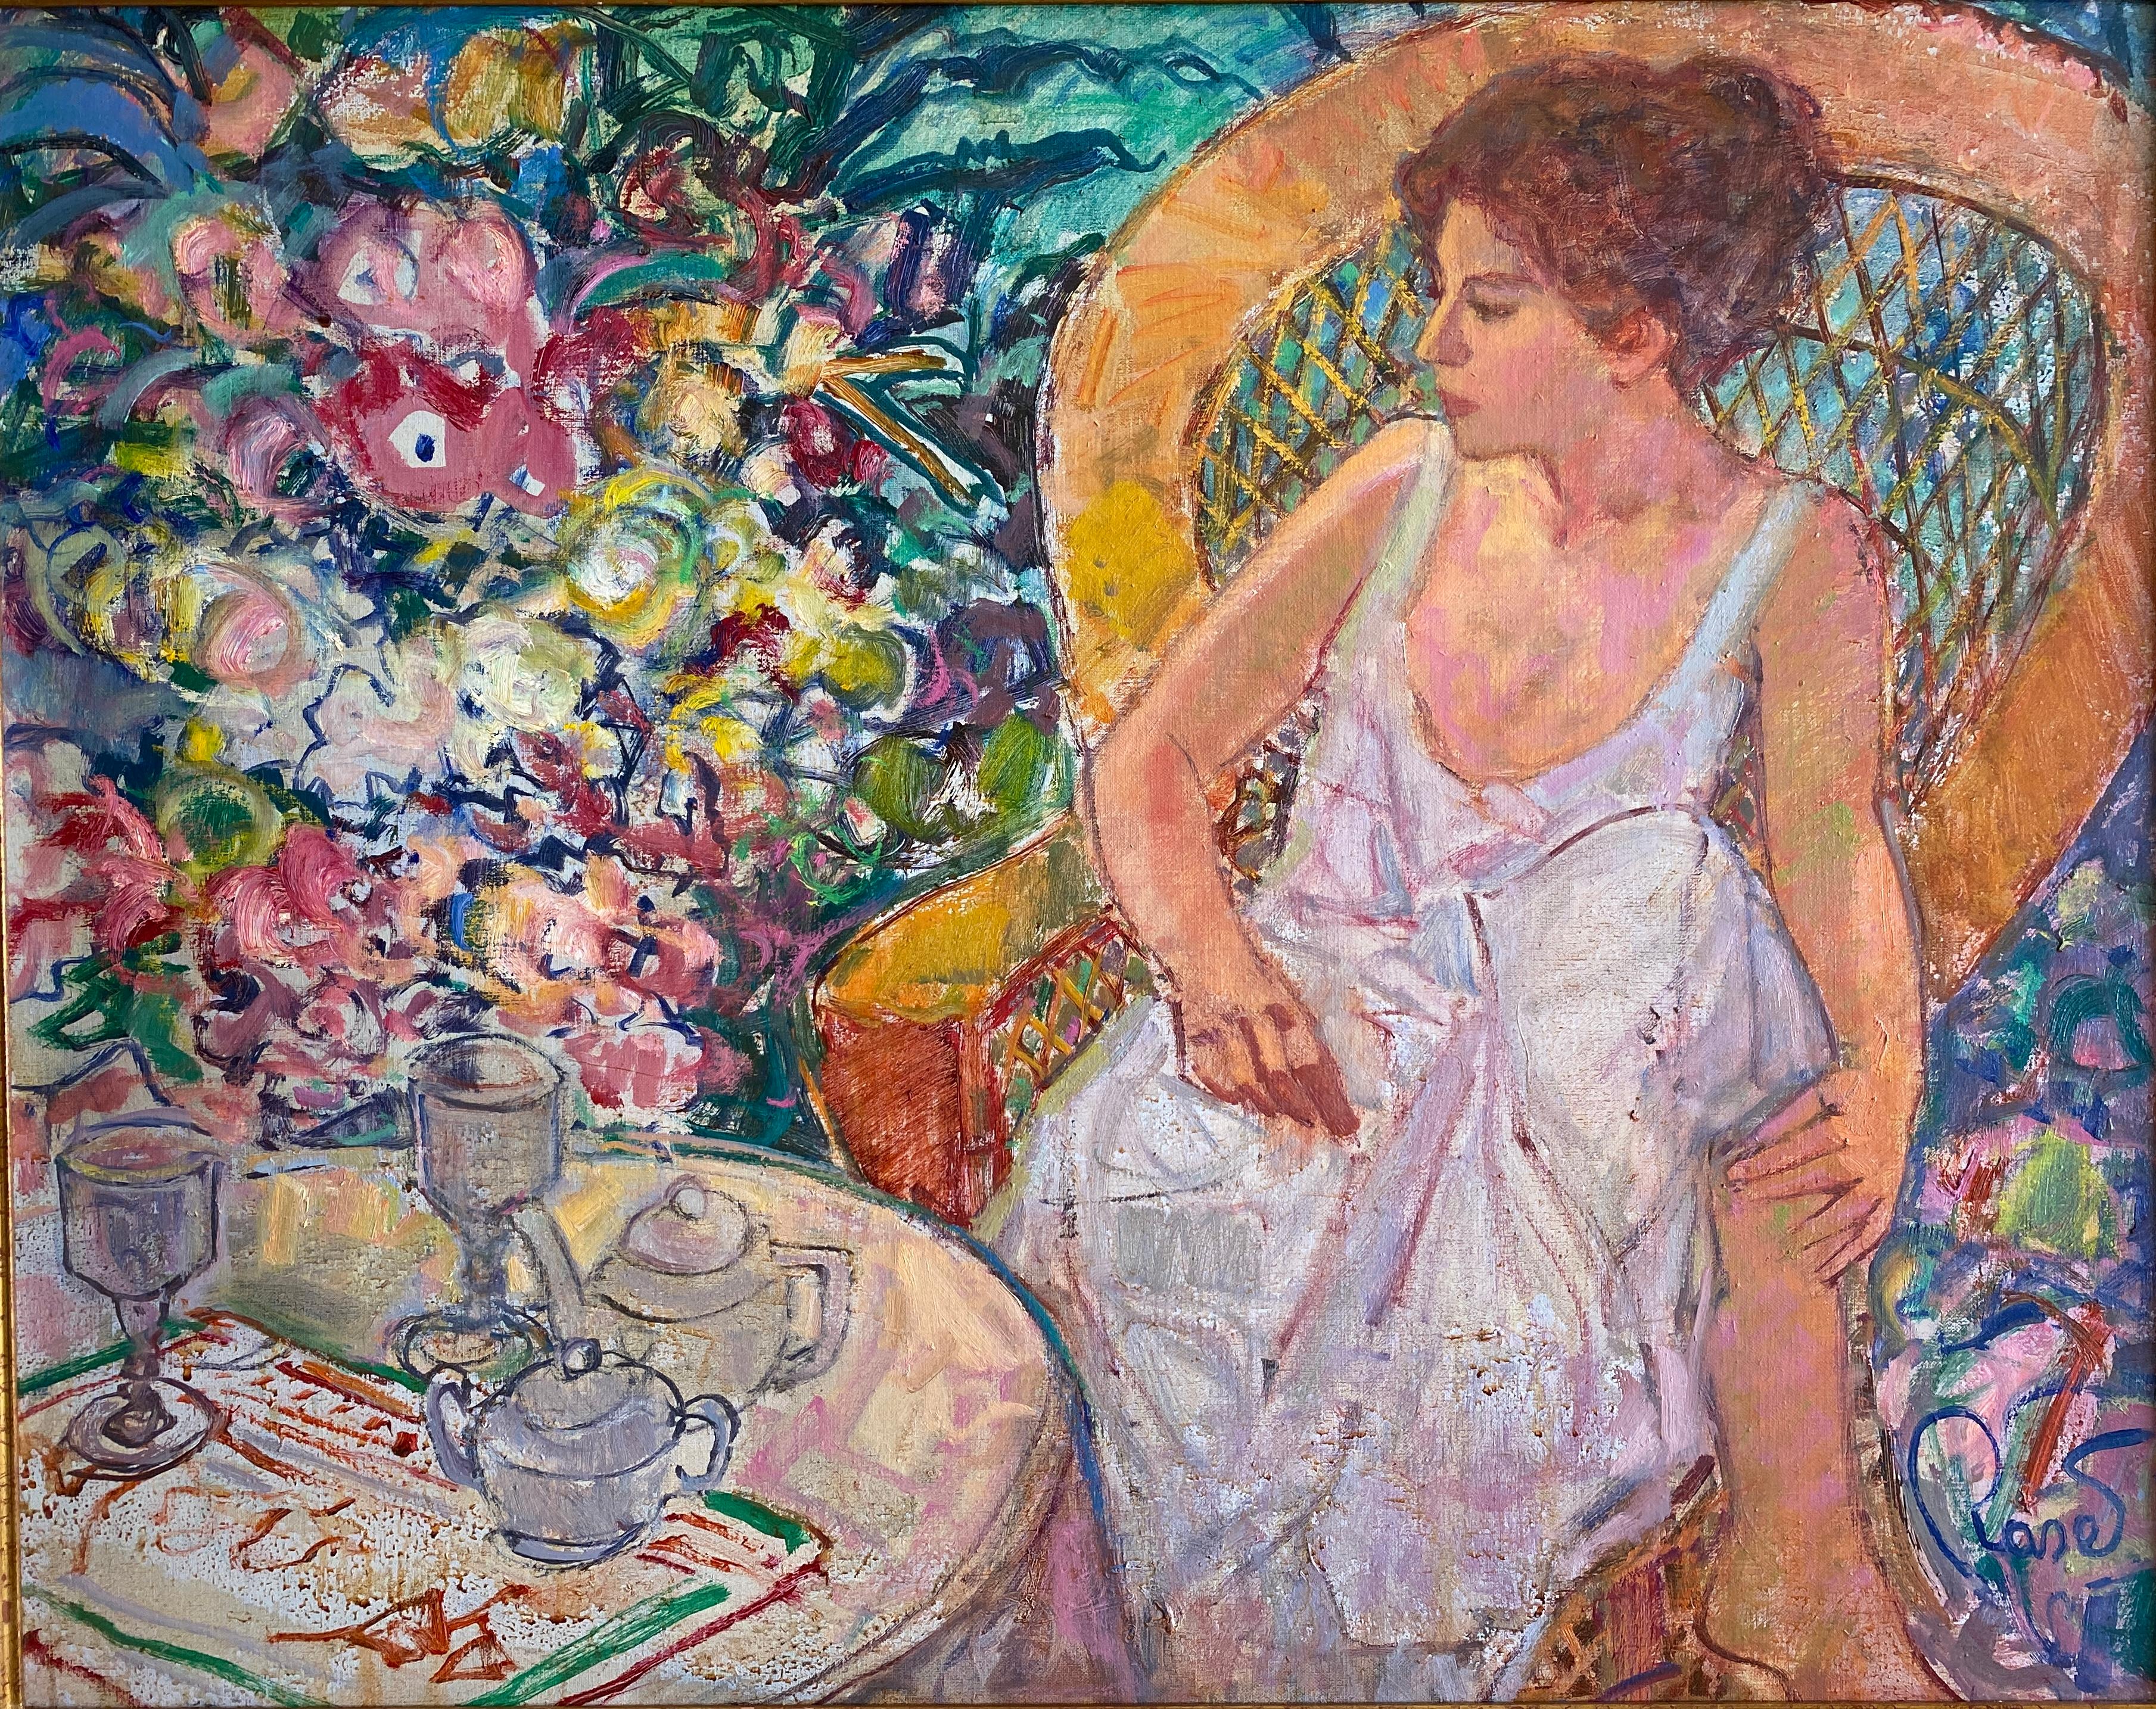 Primavera en jardín ( Spring in garden).
Oil on canvas by Spanish artist Joan Raset.
Dimension with frame 104 cm H x 121 cm W x 4,5 cm D
Dimension without frame 73 cm H x 92 cm W x 2 cm D

Moment of feminity, naturalness, sensuality, beauty with the